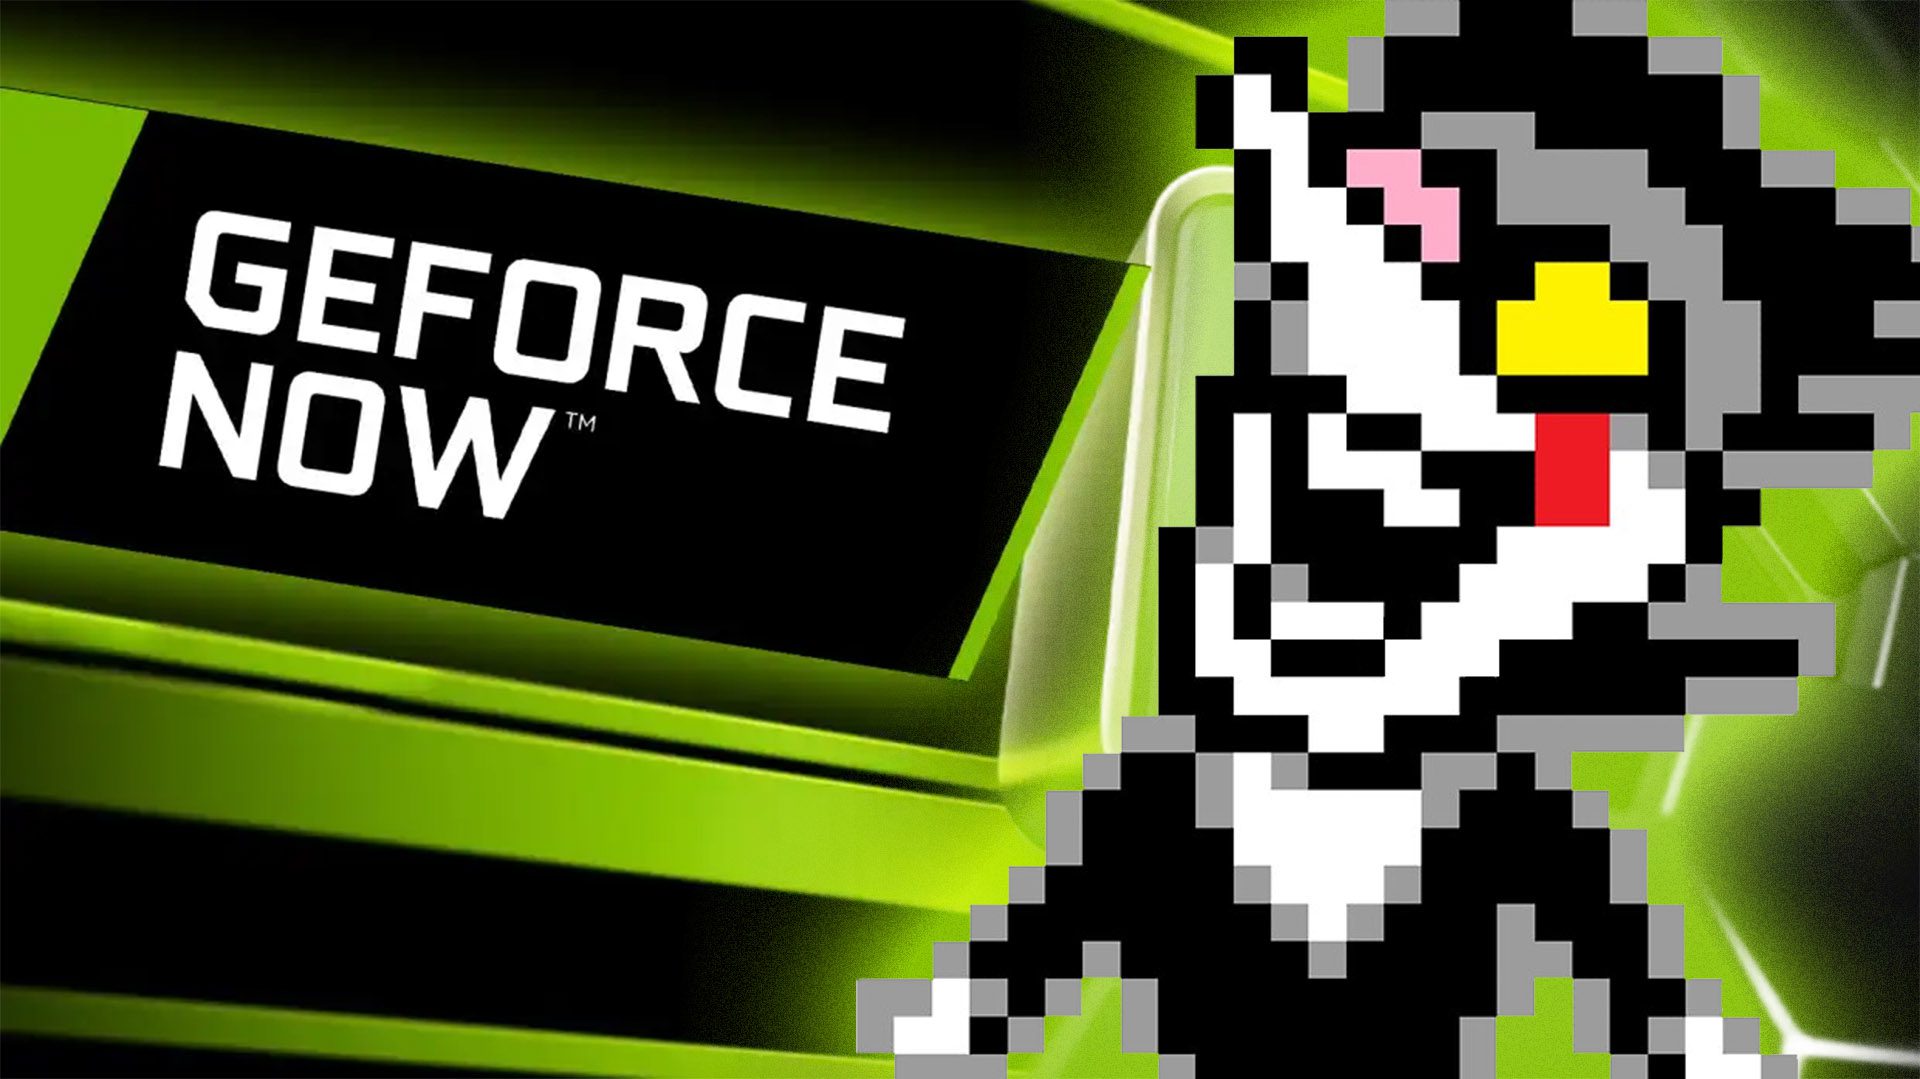 Nvidia’s GeForce Now free tier will make you watch ads before gaming